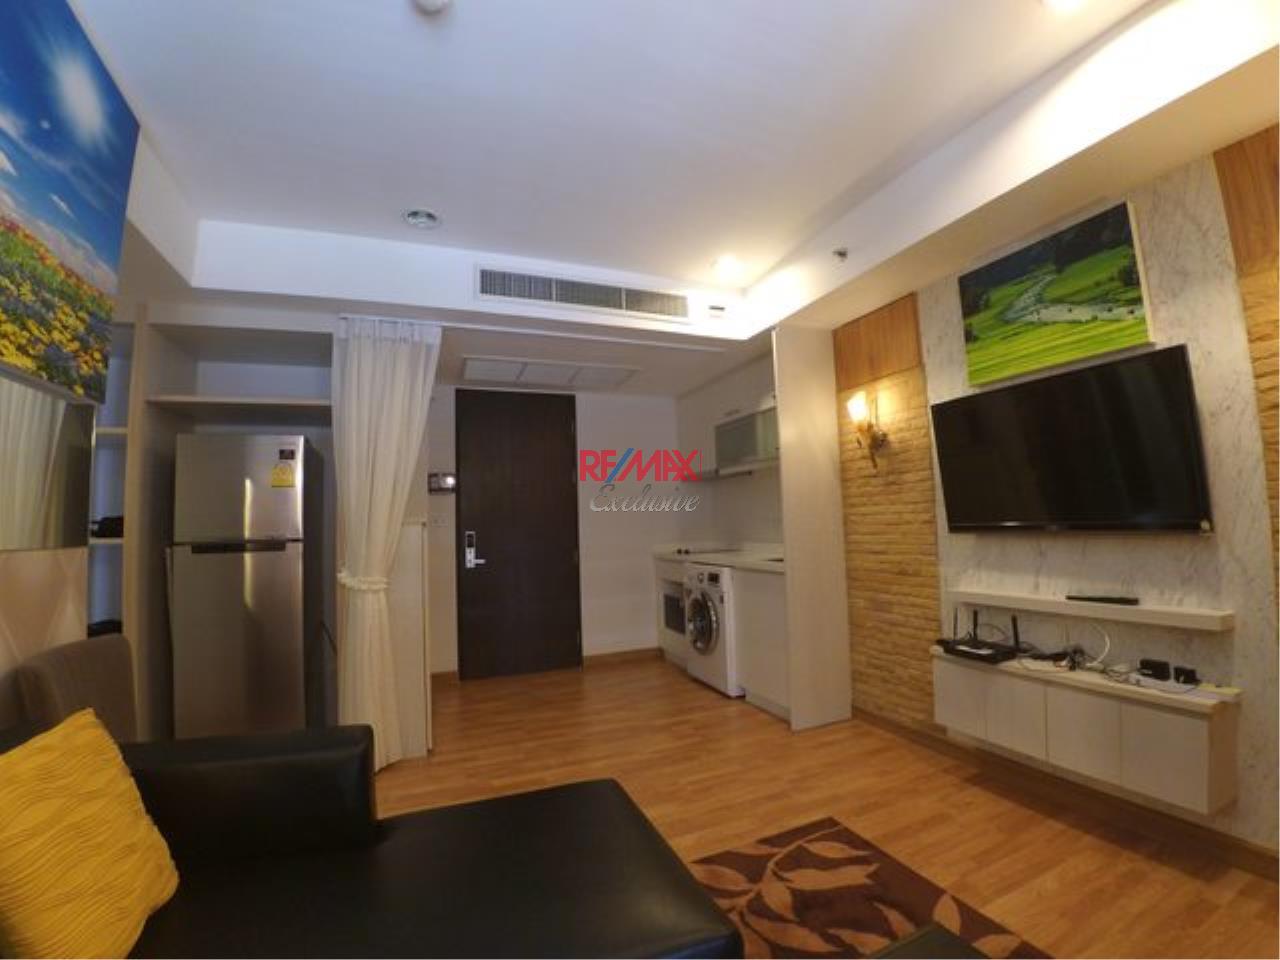 RE/MAX Exclusive Agency's THE ALCOVE, Thonglor 10, 44 Sqm., 1 Bedroom, Fully-Furnished, Fully Equipped Kitchen For RENT !!!! 4